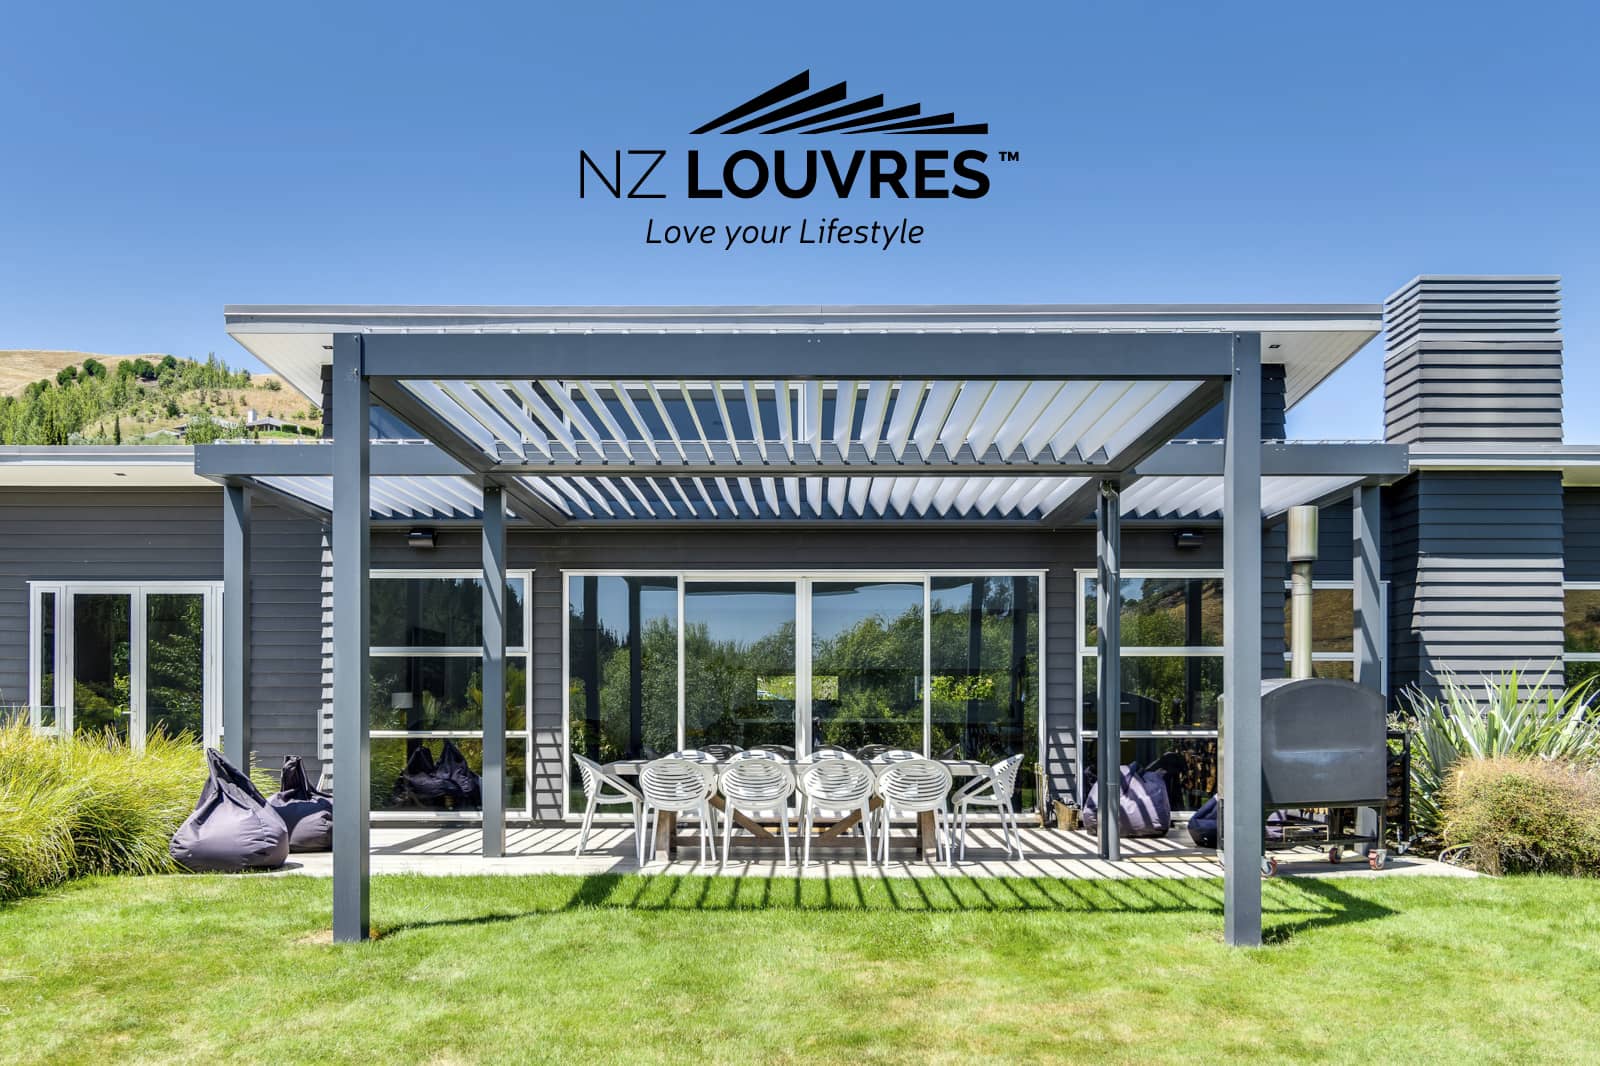 A NZ Louvres roof installation by Douglas at Black Barn Cottages Hawkes Bay